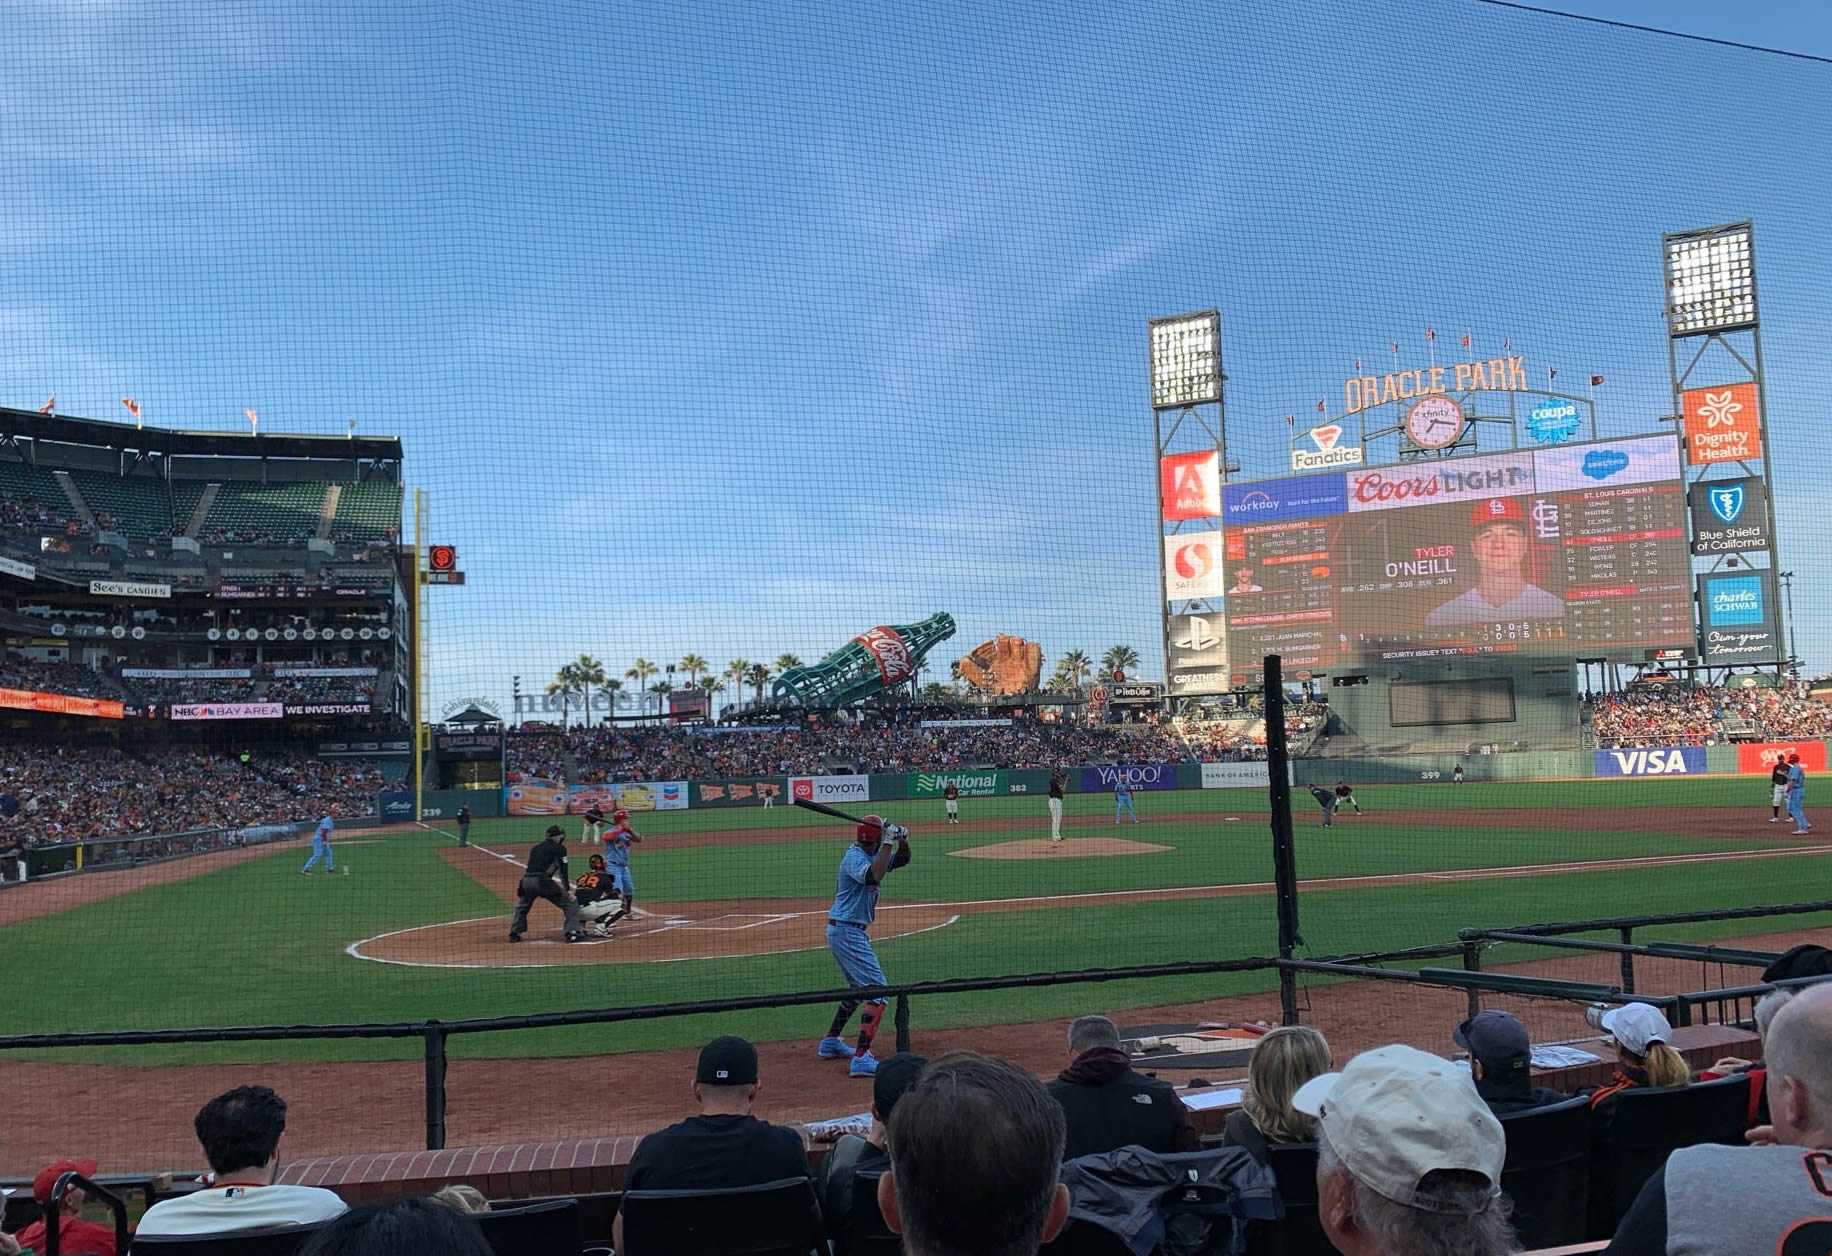 section 113, row ddd seat view  for baseball - oracle park